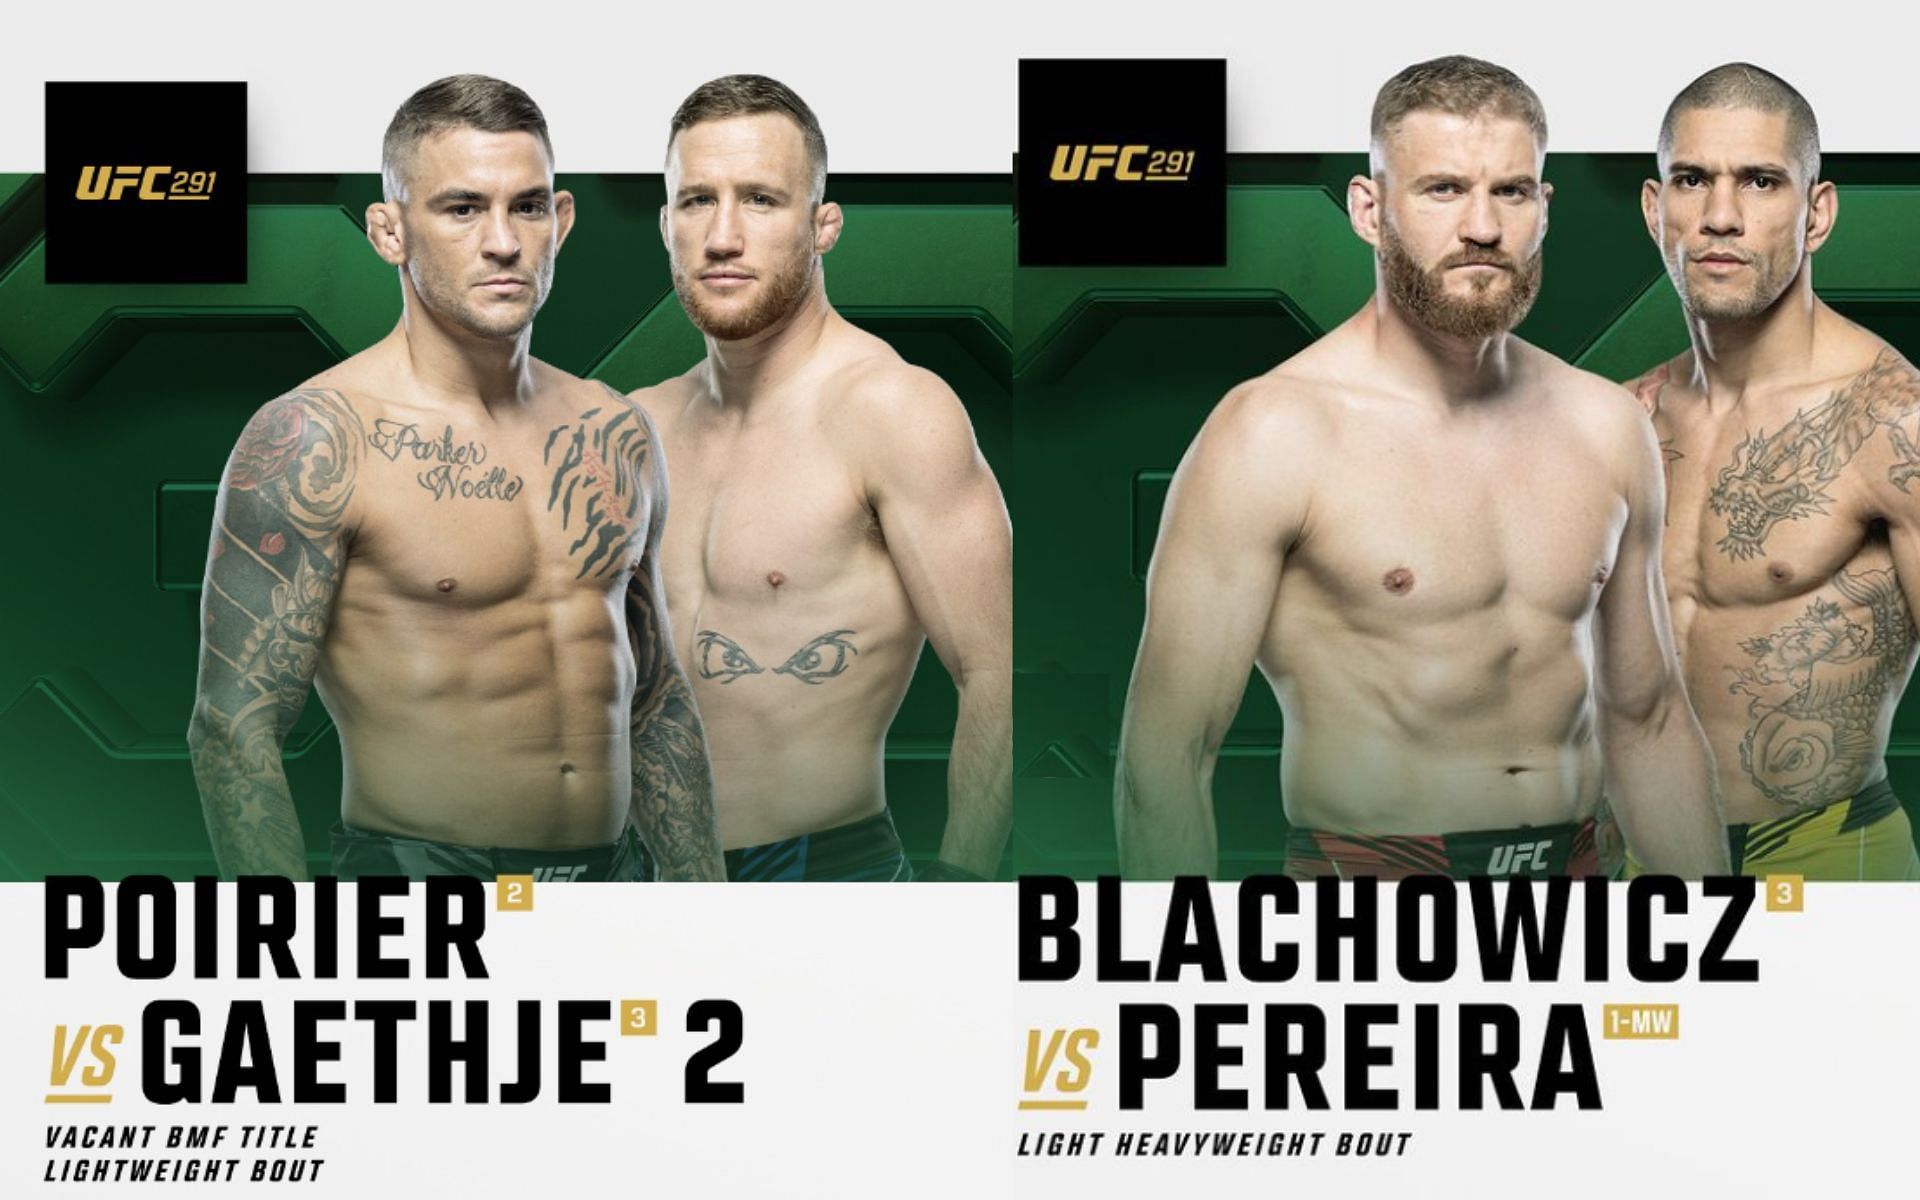 When is UFC 291 Date, venue, fight card, ticket prices and more